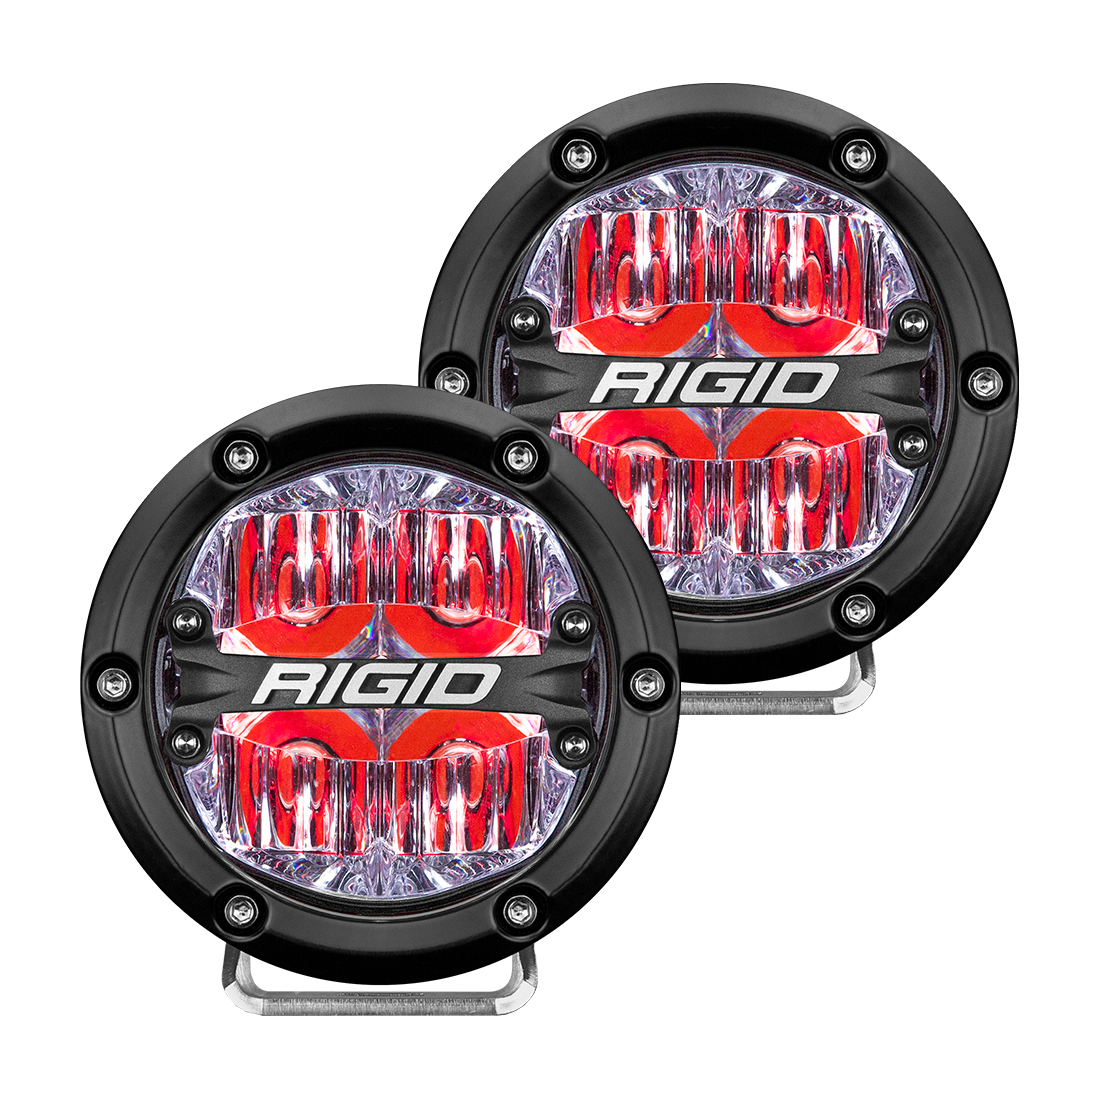 Rigid Industries 360-Series 4 Inch Led Off-Road Drive Beam Red Backlight Pair